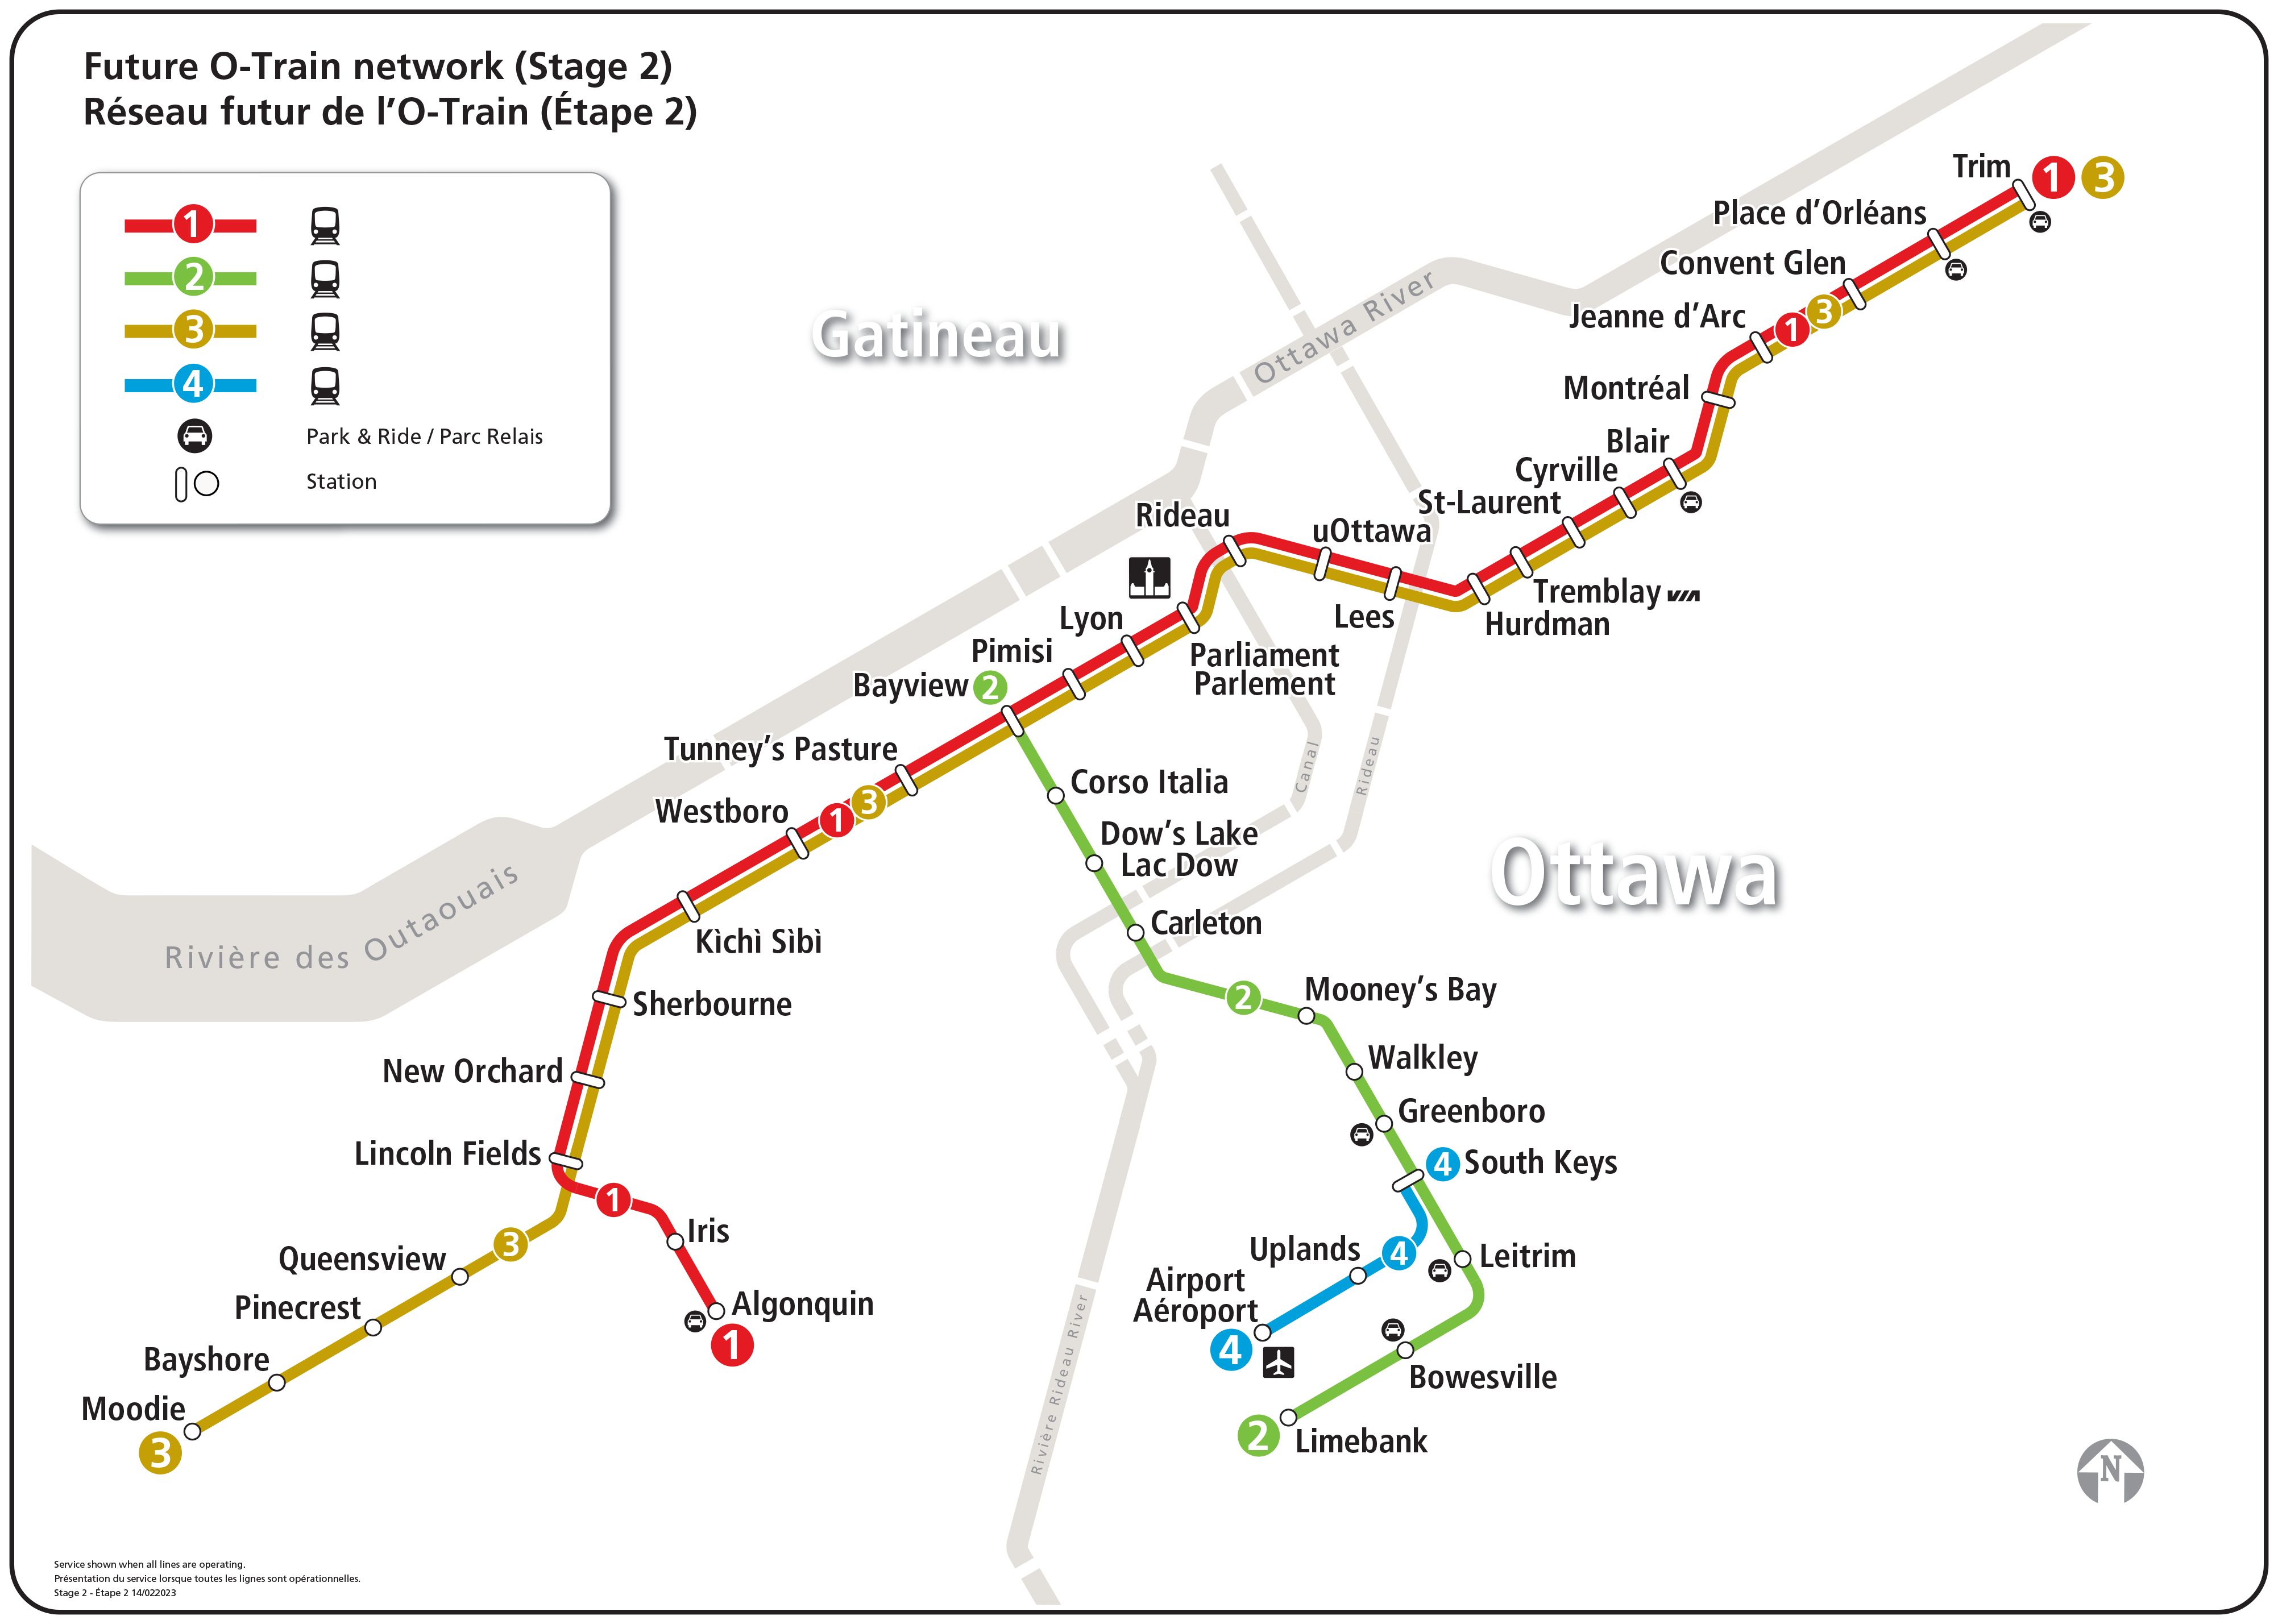 Map of Stage 2 future train network.